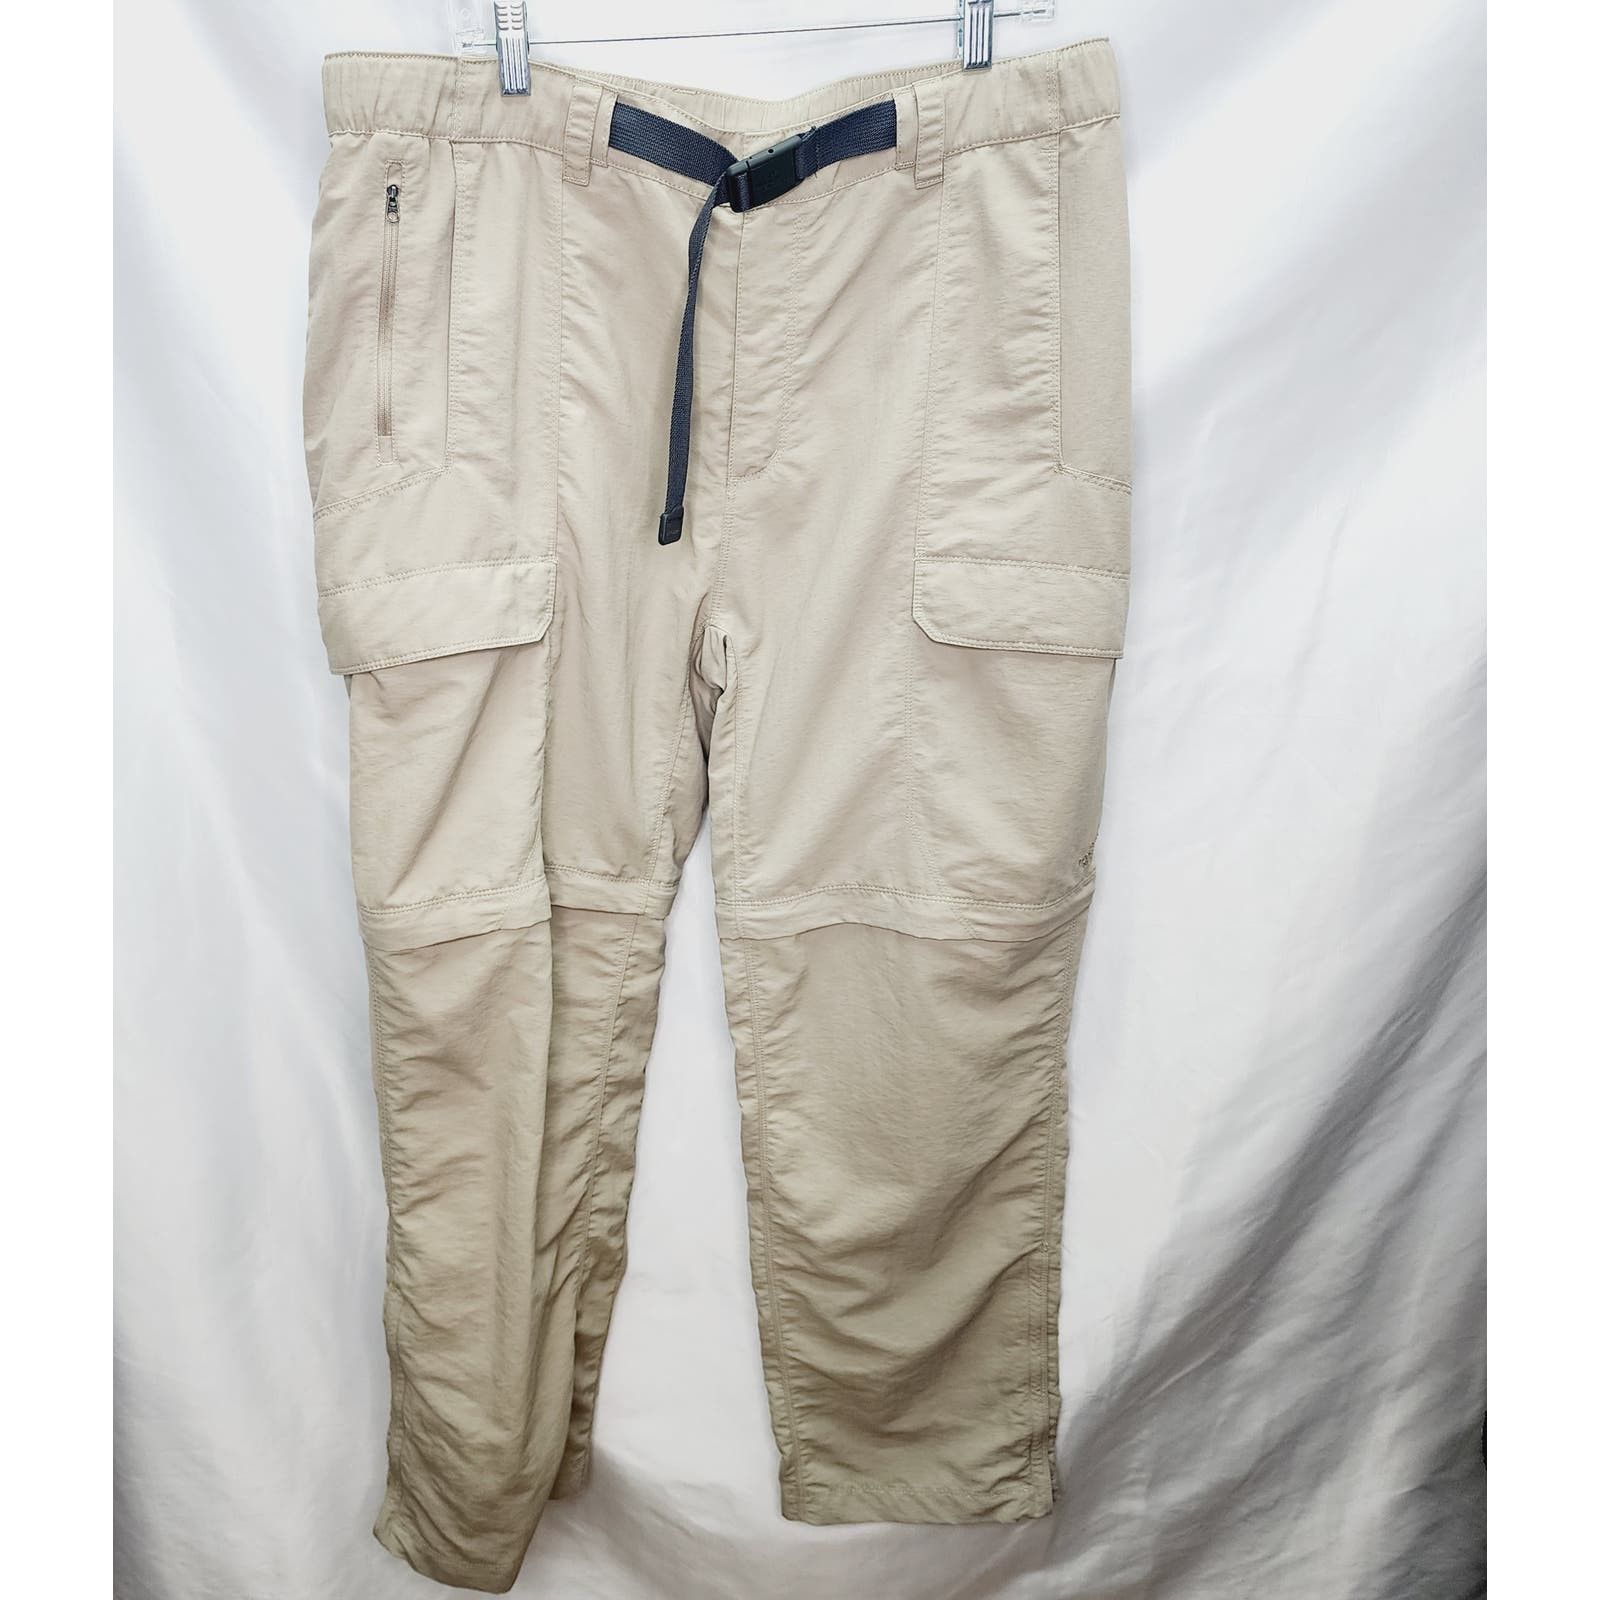 The North Face Pants | The North Face Mens Convertible Pants Nylon Hiking Khaki Size XL 38 x 31 Belted | Color: Cream/Tan | Size: XL | Yiotiswins's